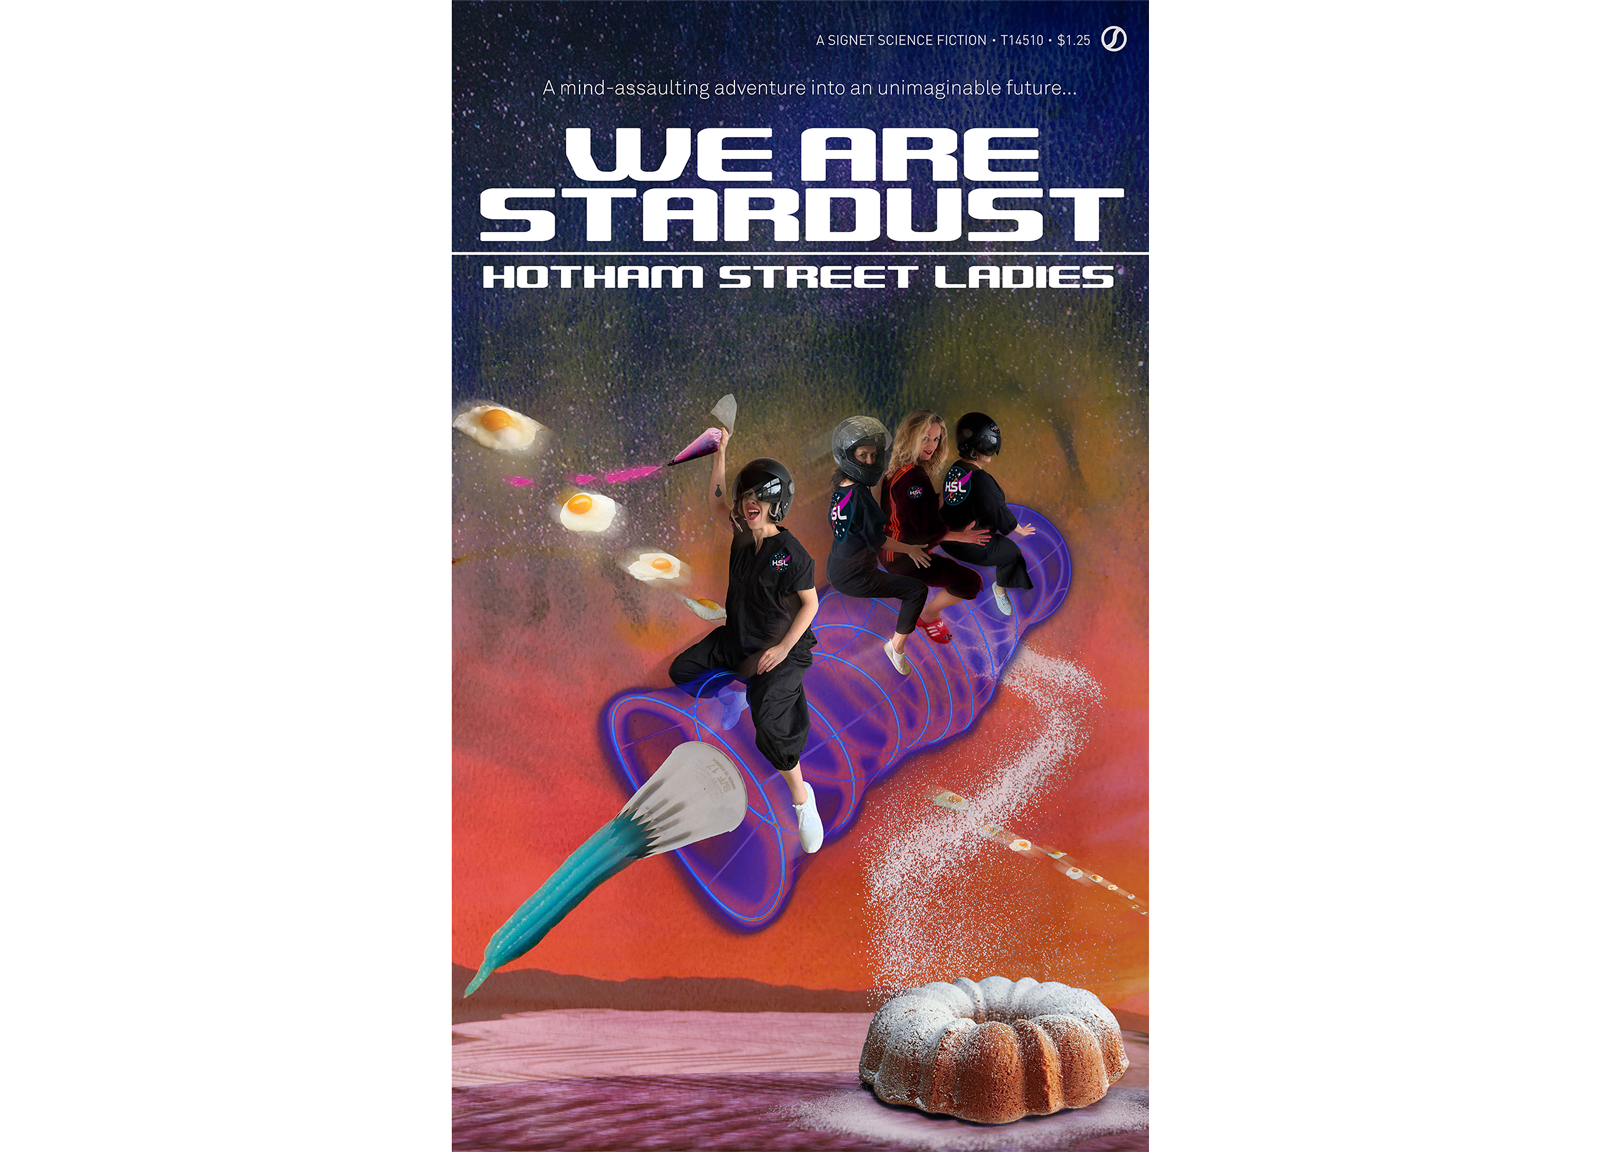 We-Are-Stardust.png